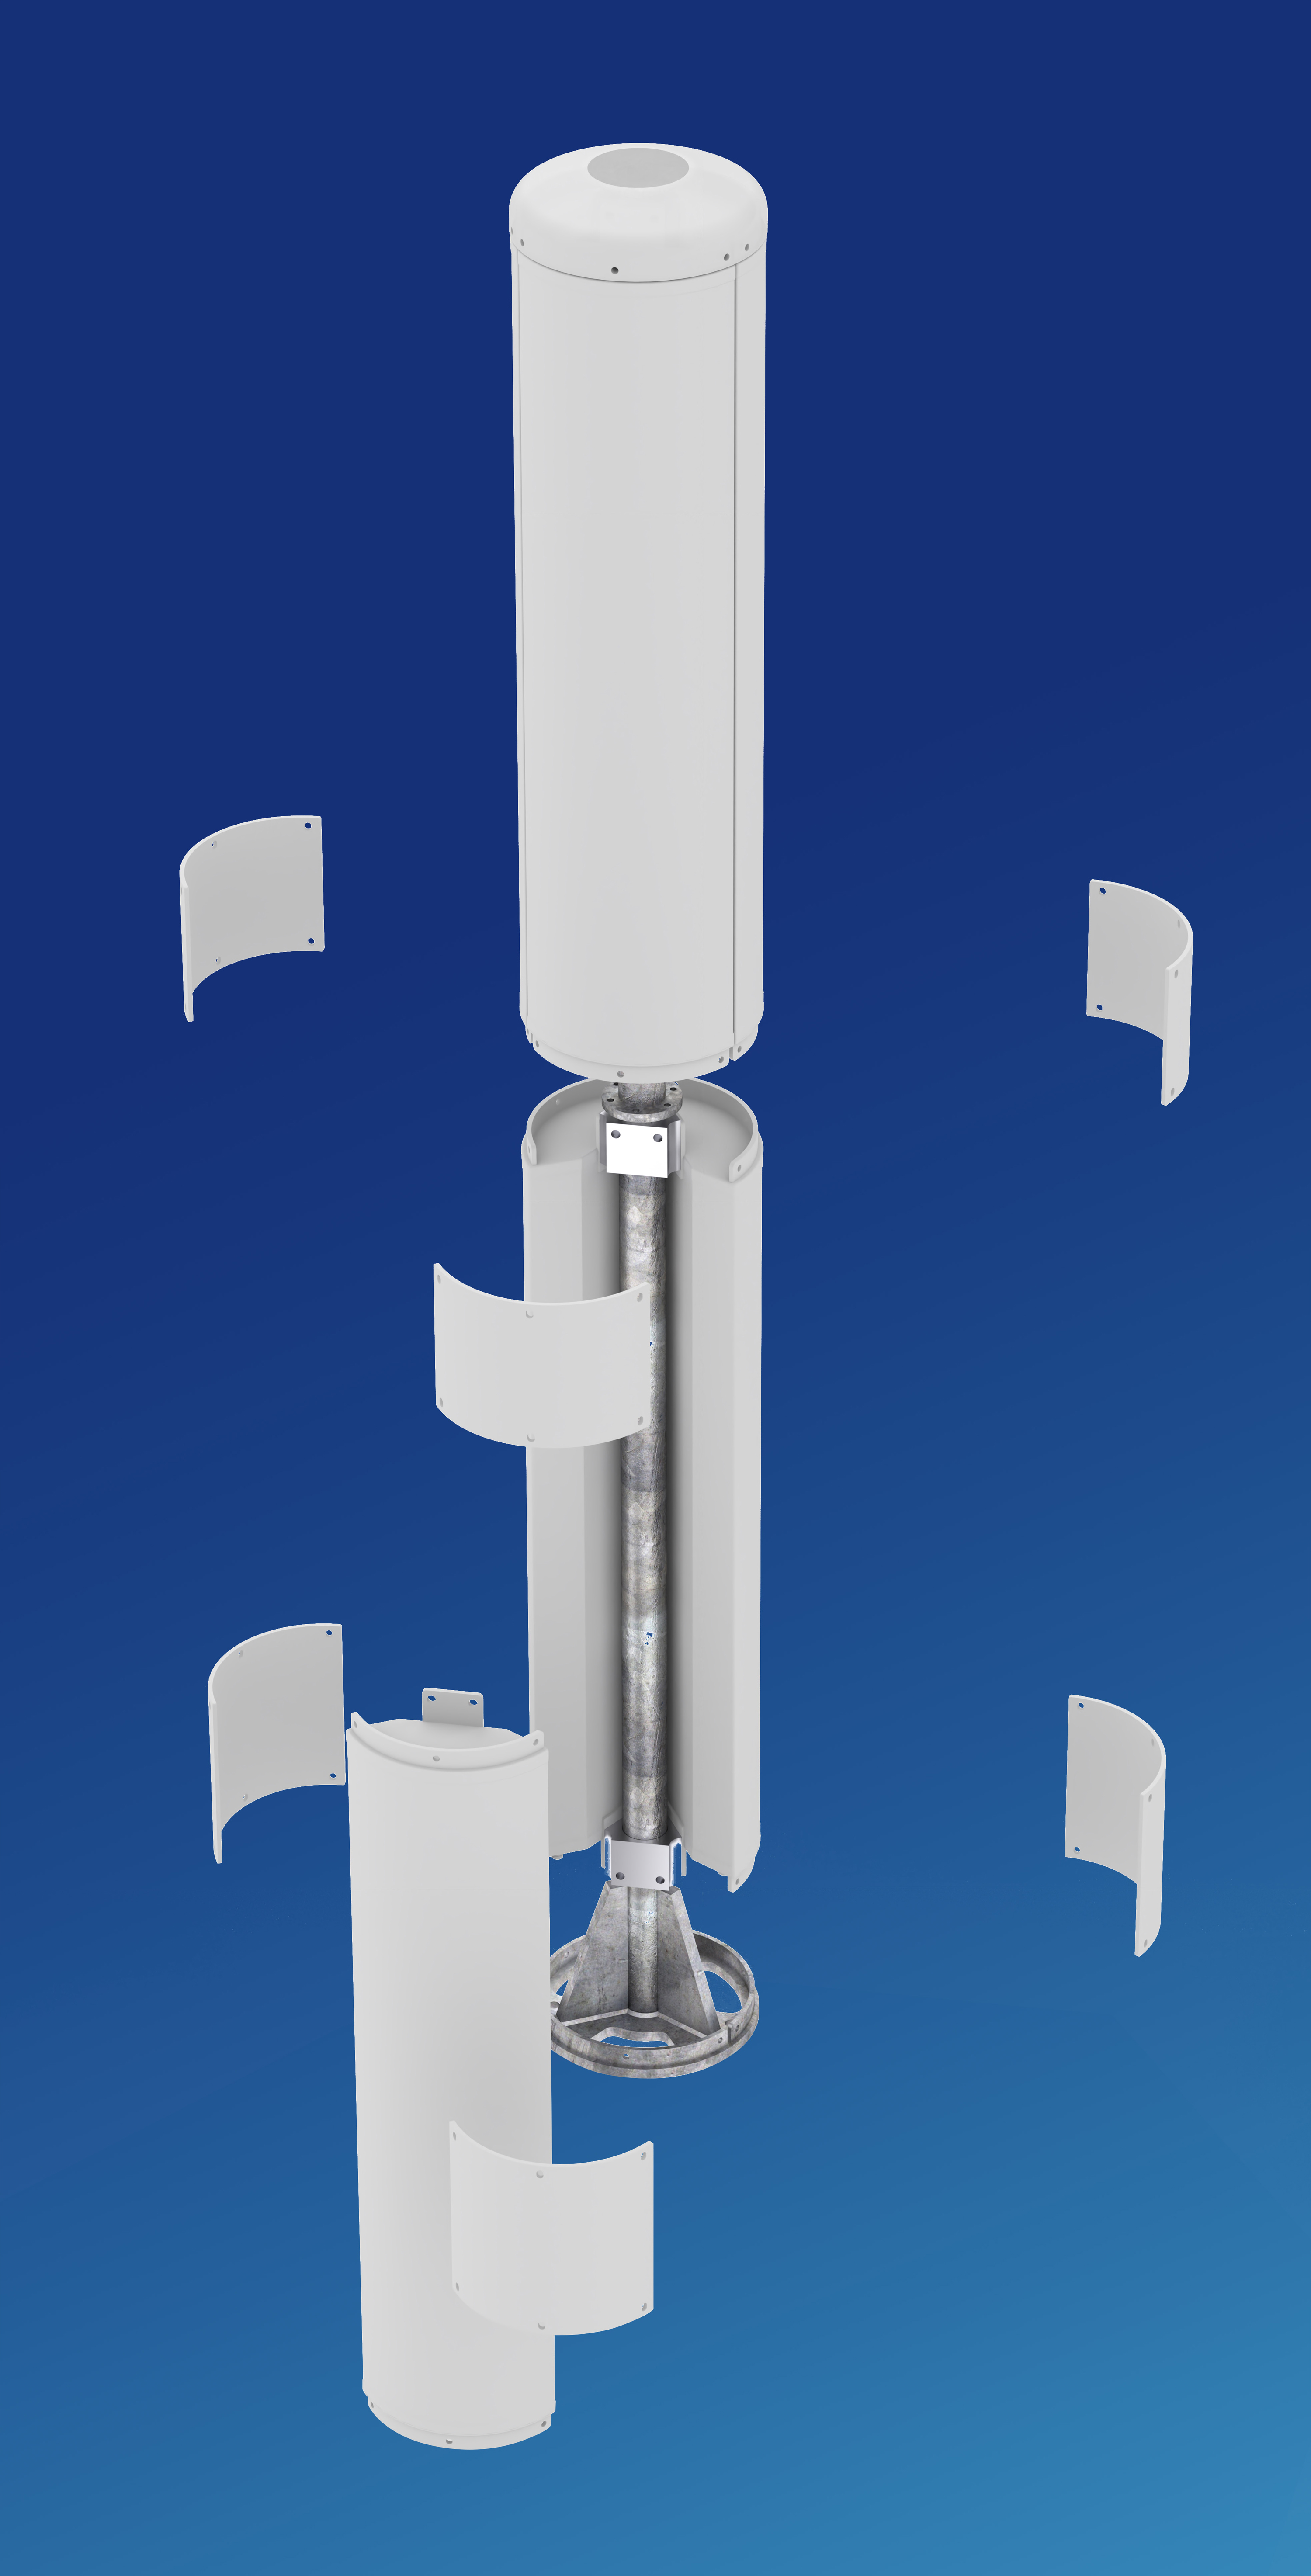 The new Compact Modular Tri-Sector Antenna Platform from Alpha Wireless enables rapid site deployment and maintenance plus simple field upgrades with a future-ready design.